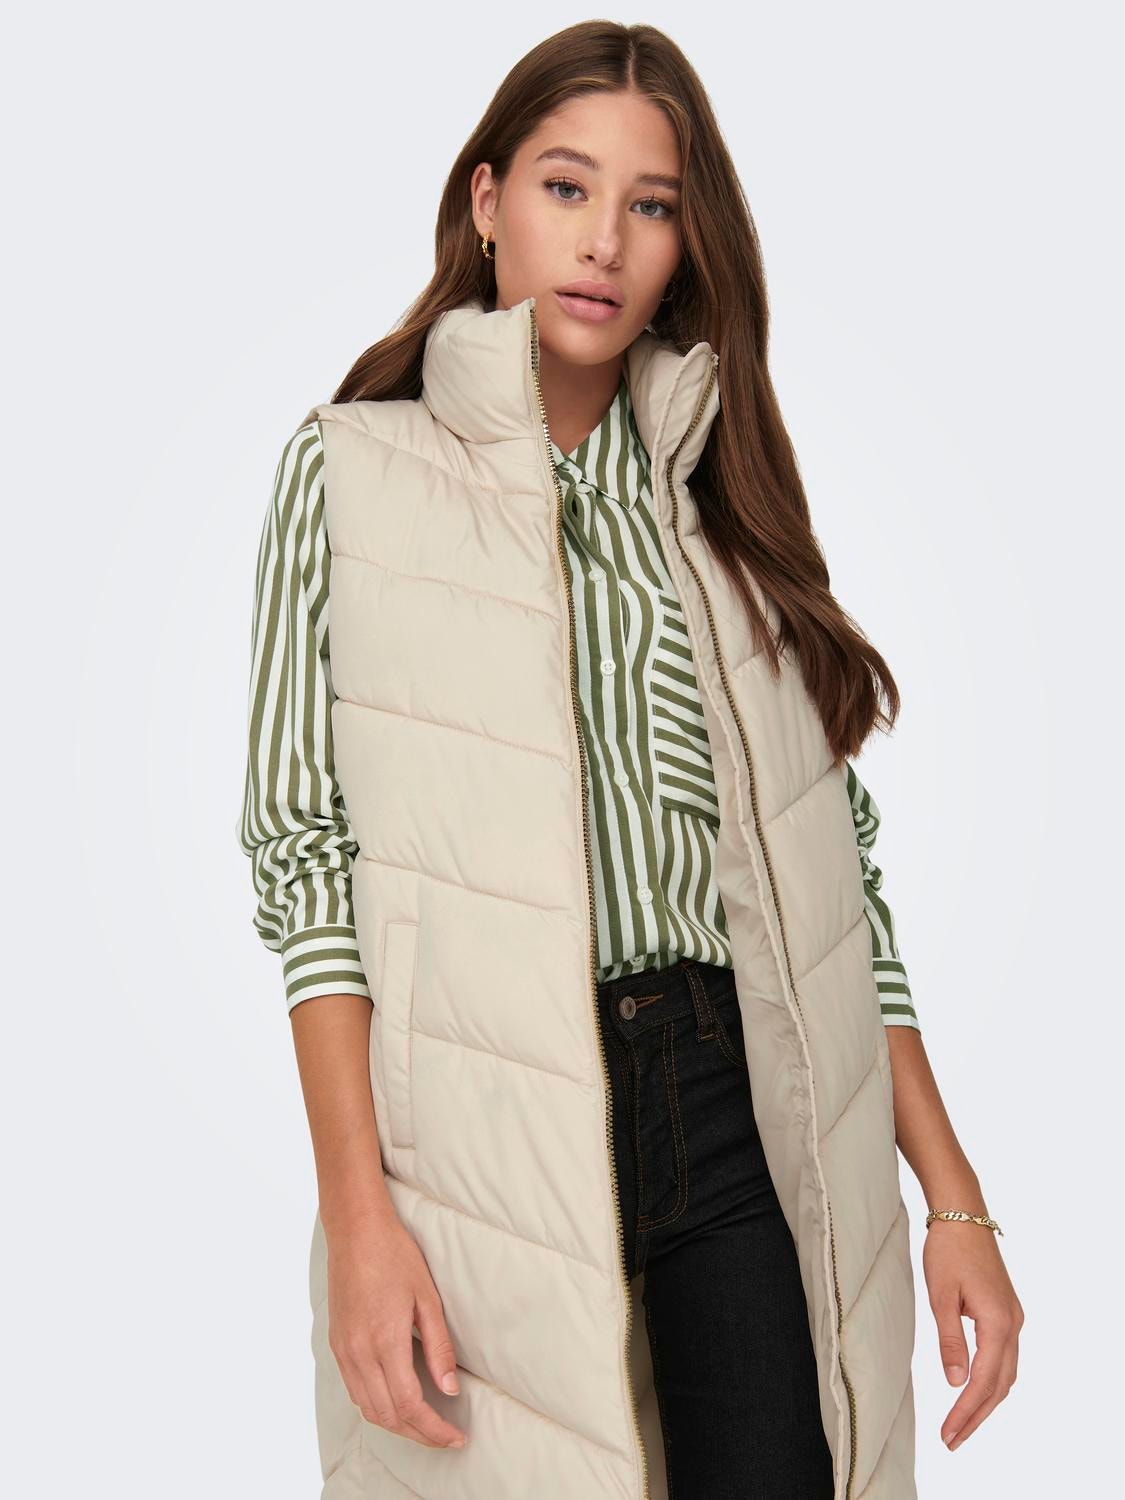 ONLY Long vest with high neck -Moonbeam - 15305655